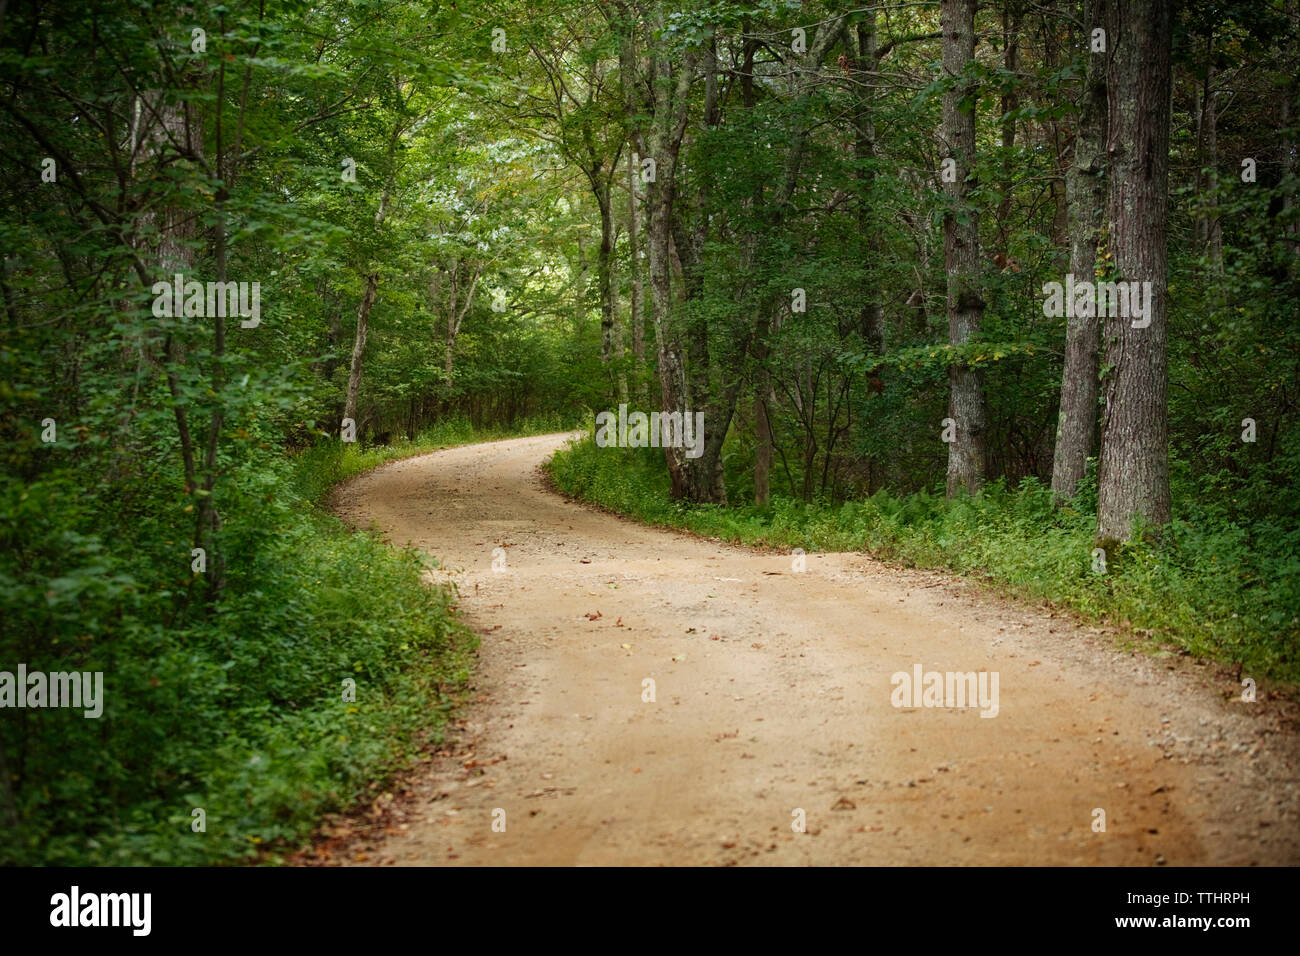 Dirt road amidst trees in forest Stock Photo